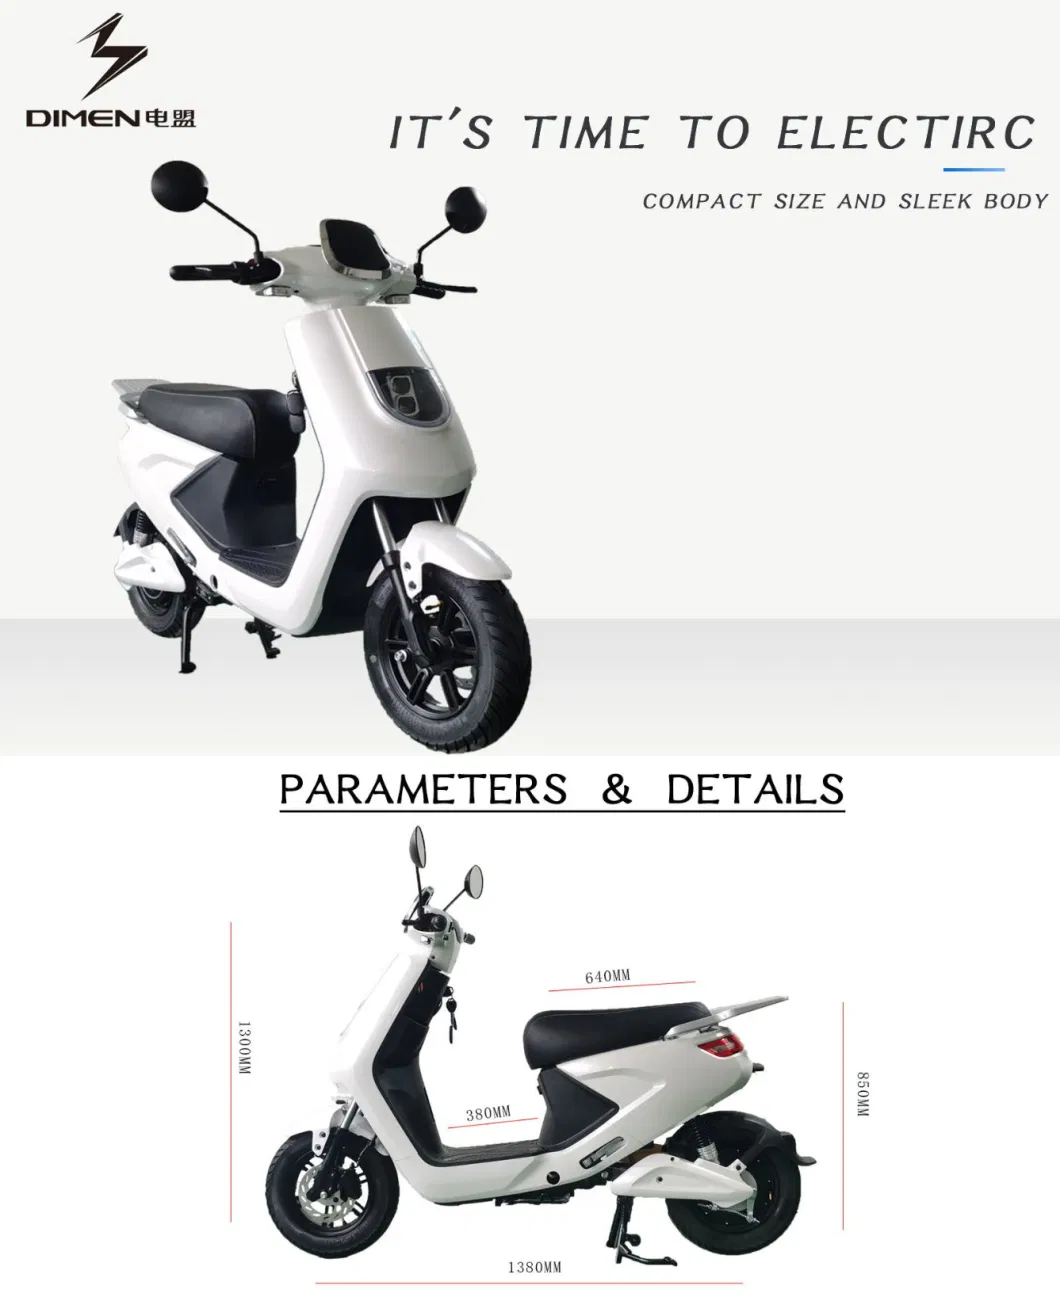 Cheap Price Good Design Best OEM Branding CKD/SKD Adult Electric Moped Motorcycle Scooter Electrical Cycle